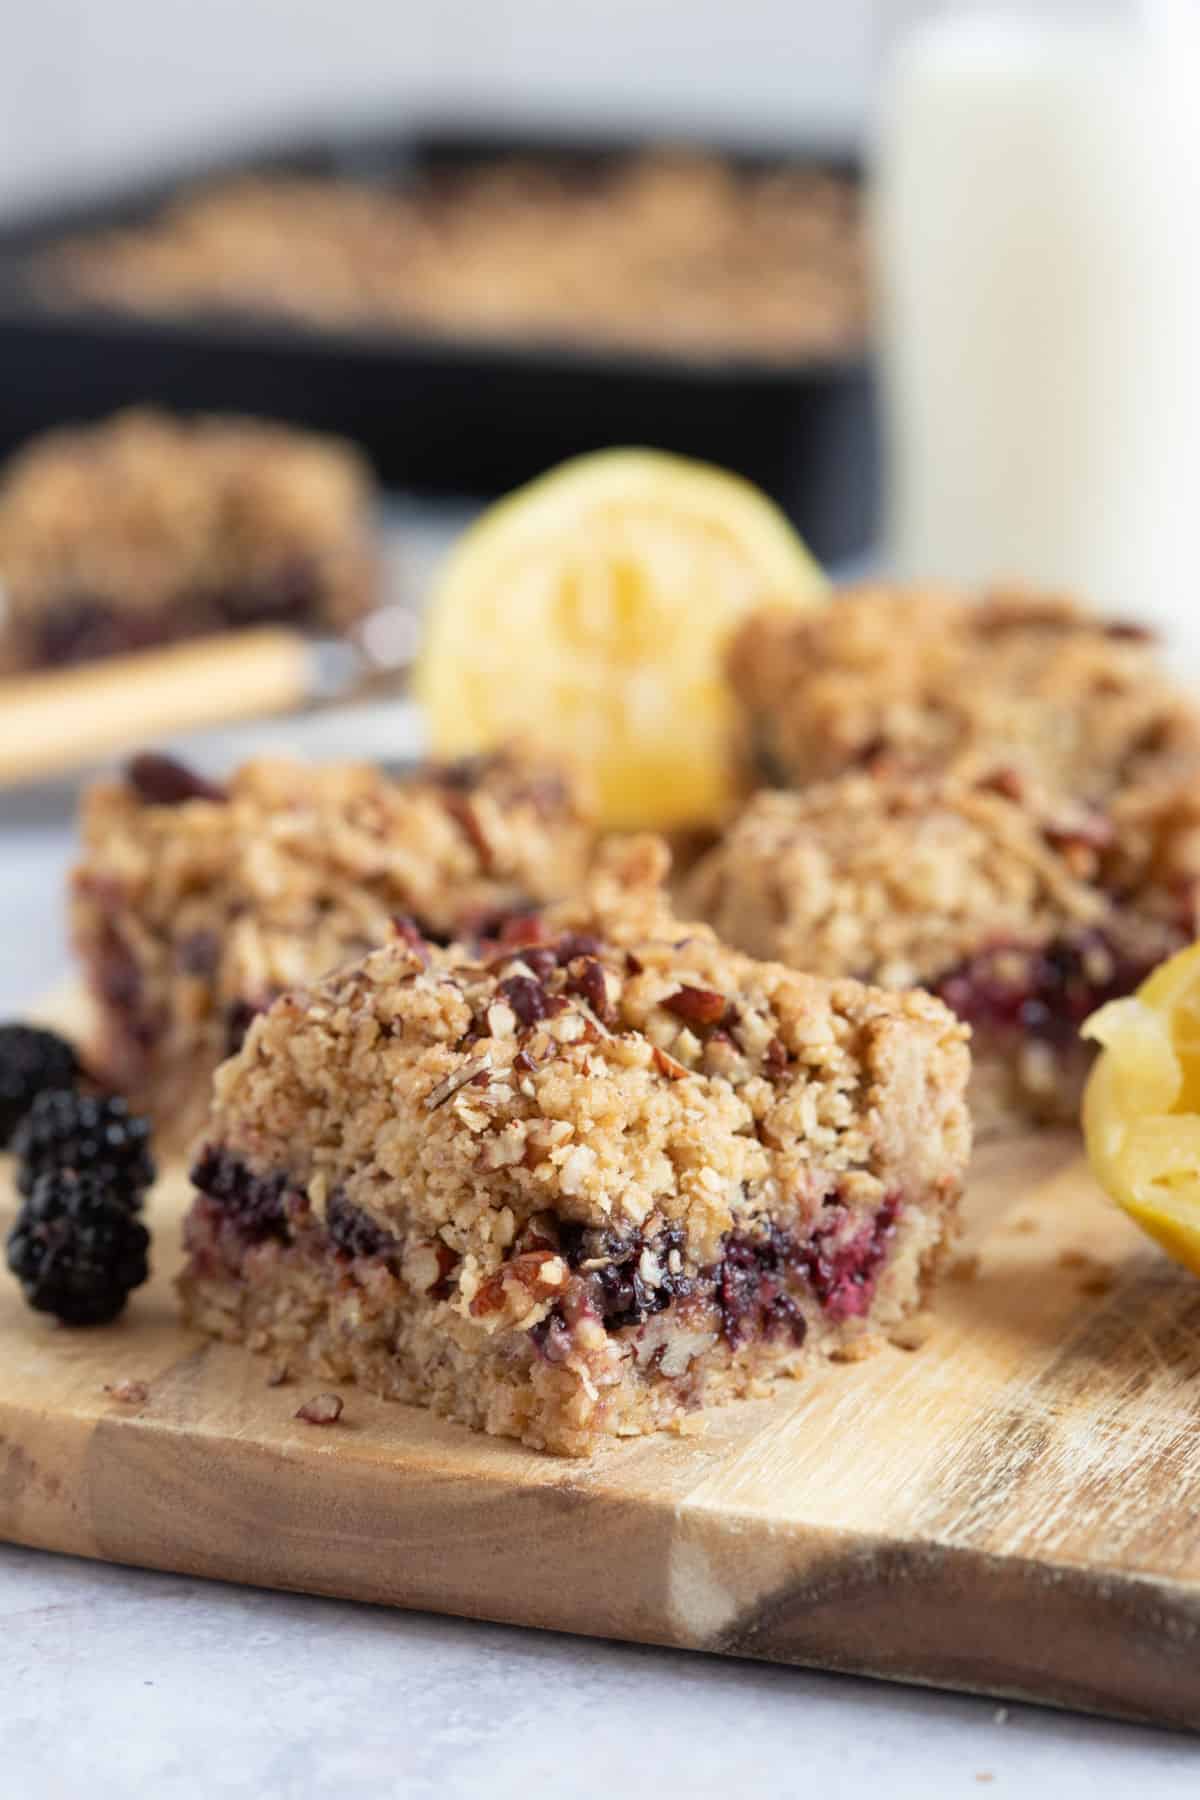 A blackberry crumble bar on a wooden board.